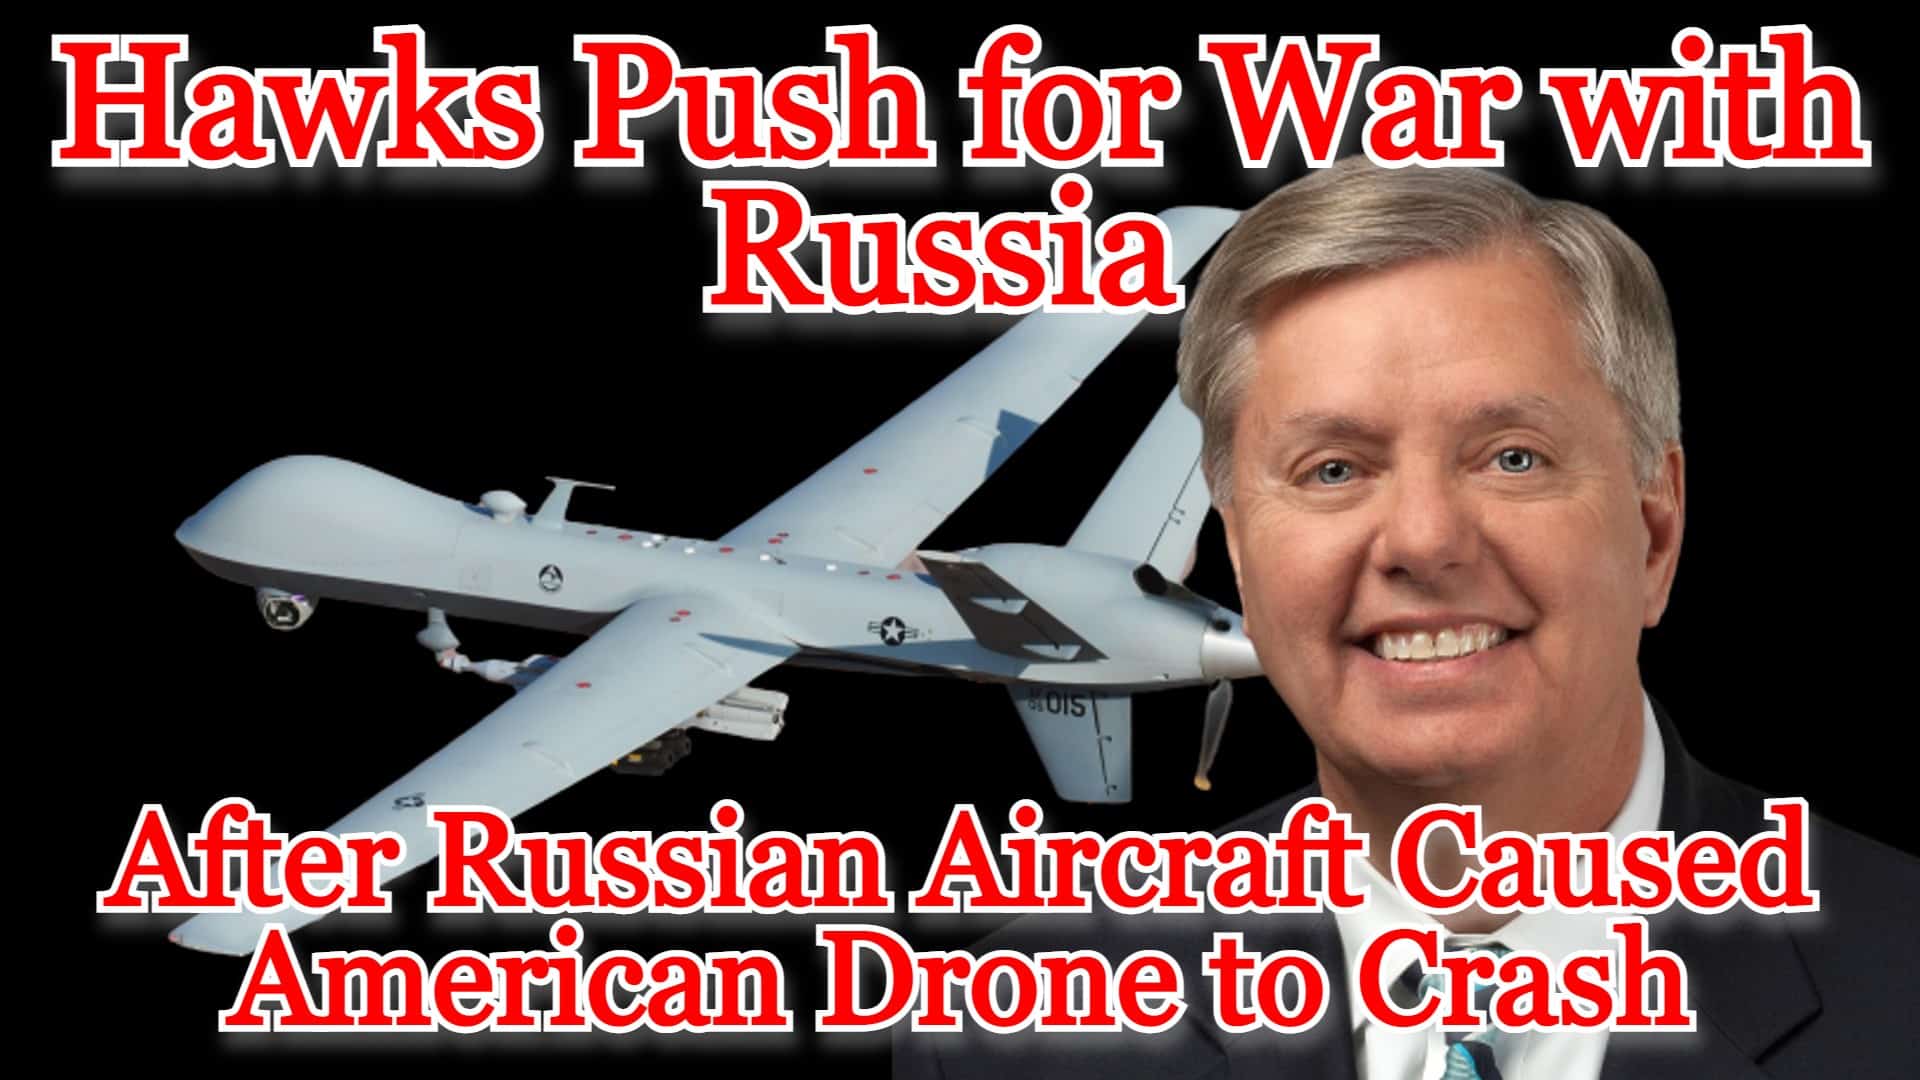 COI #397: Hawks Push for War with Russia After Russian Aircraft Caused American Drone to Crash